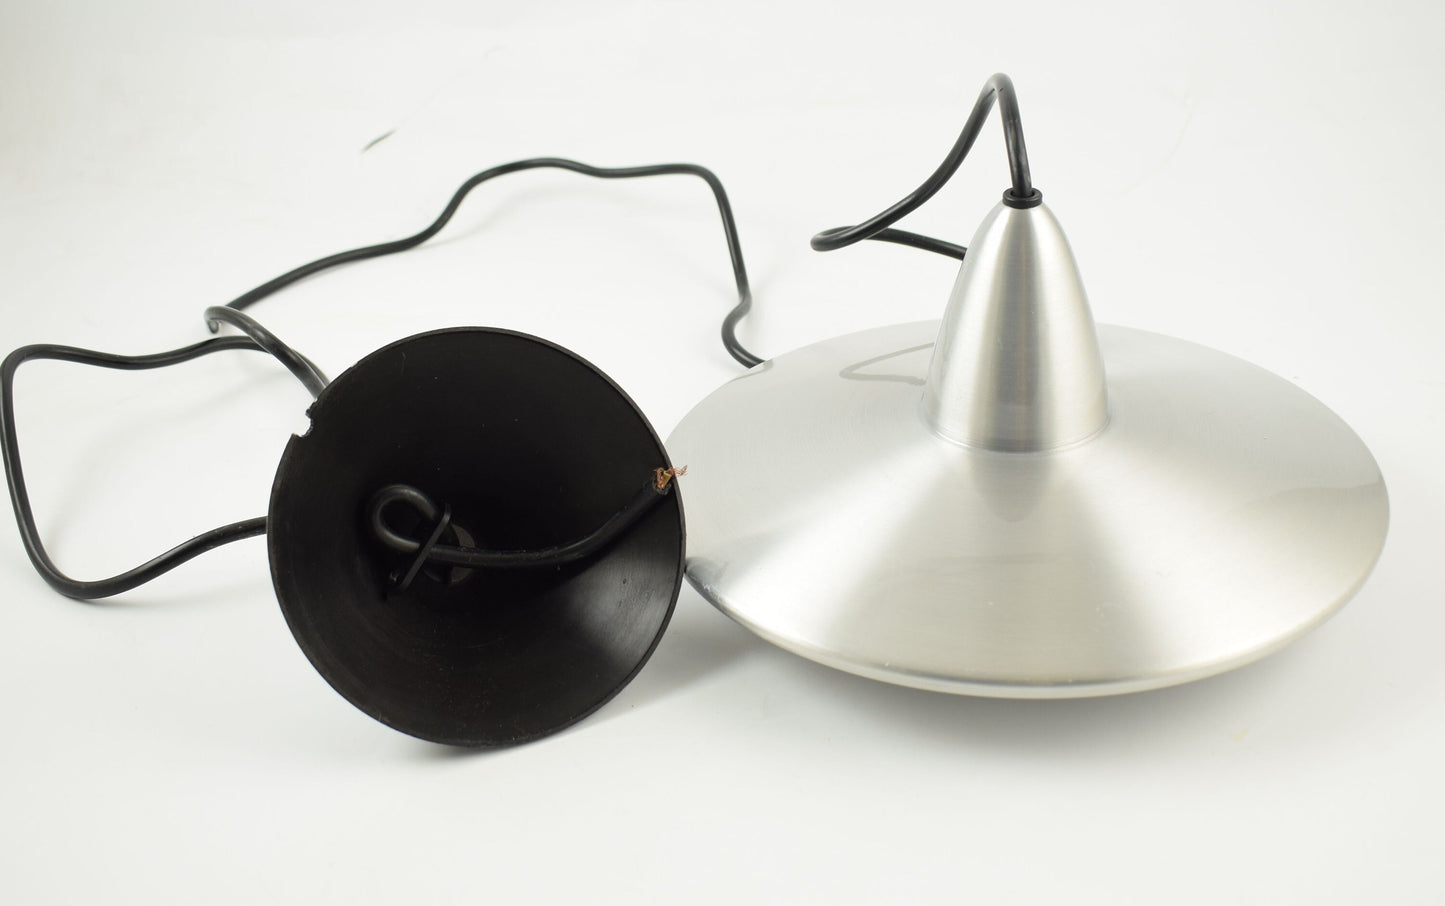 Aluminum hanging lamp in the shape of an ufo from dutch design company Hala.